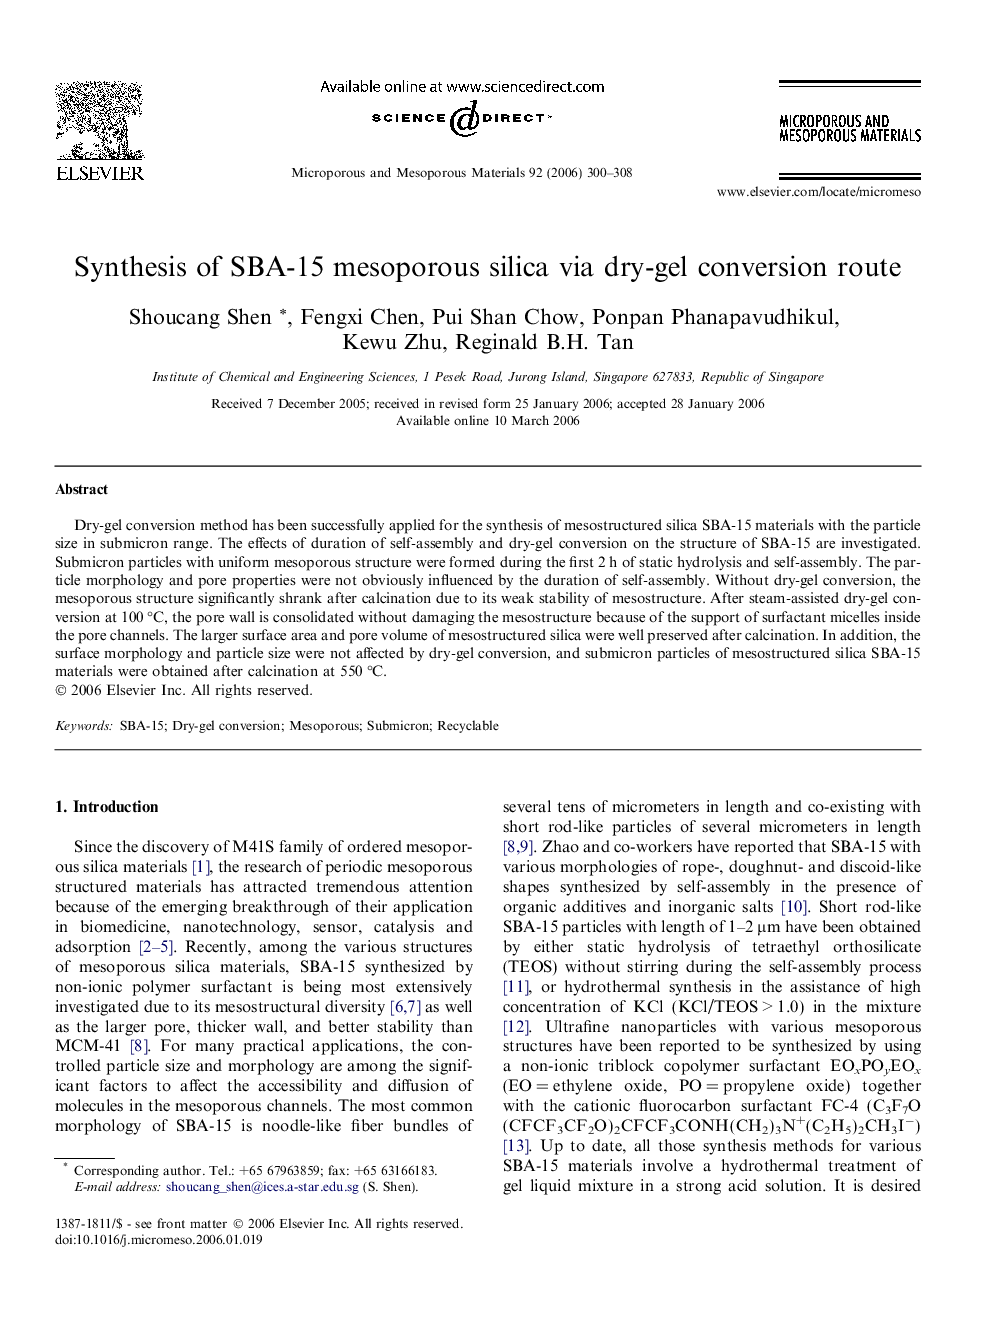 Synthesis of SBA-15 mesoporous silica via dry-gel conversion route